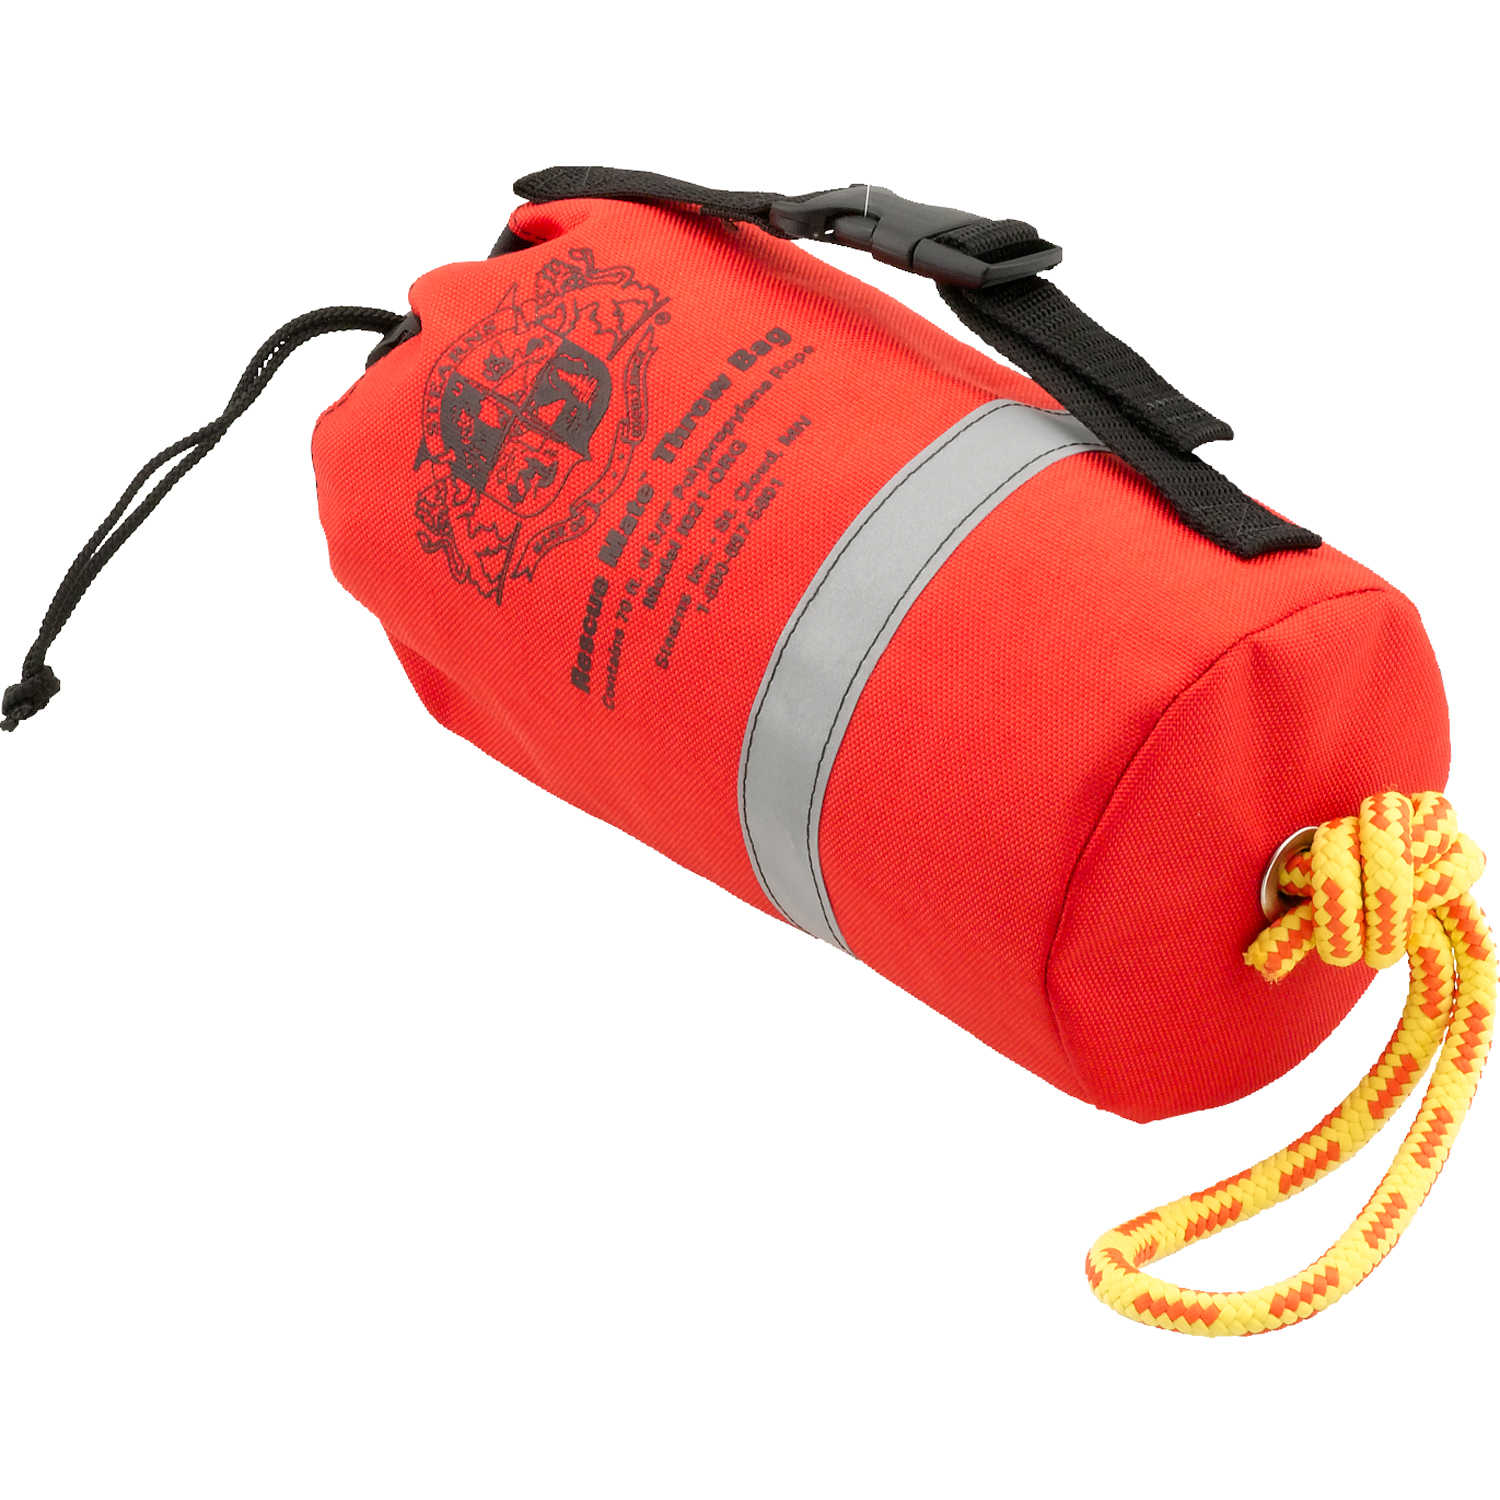 Mustang Survival Corp 75 Rope Throw Bag PRO